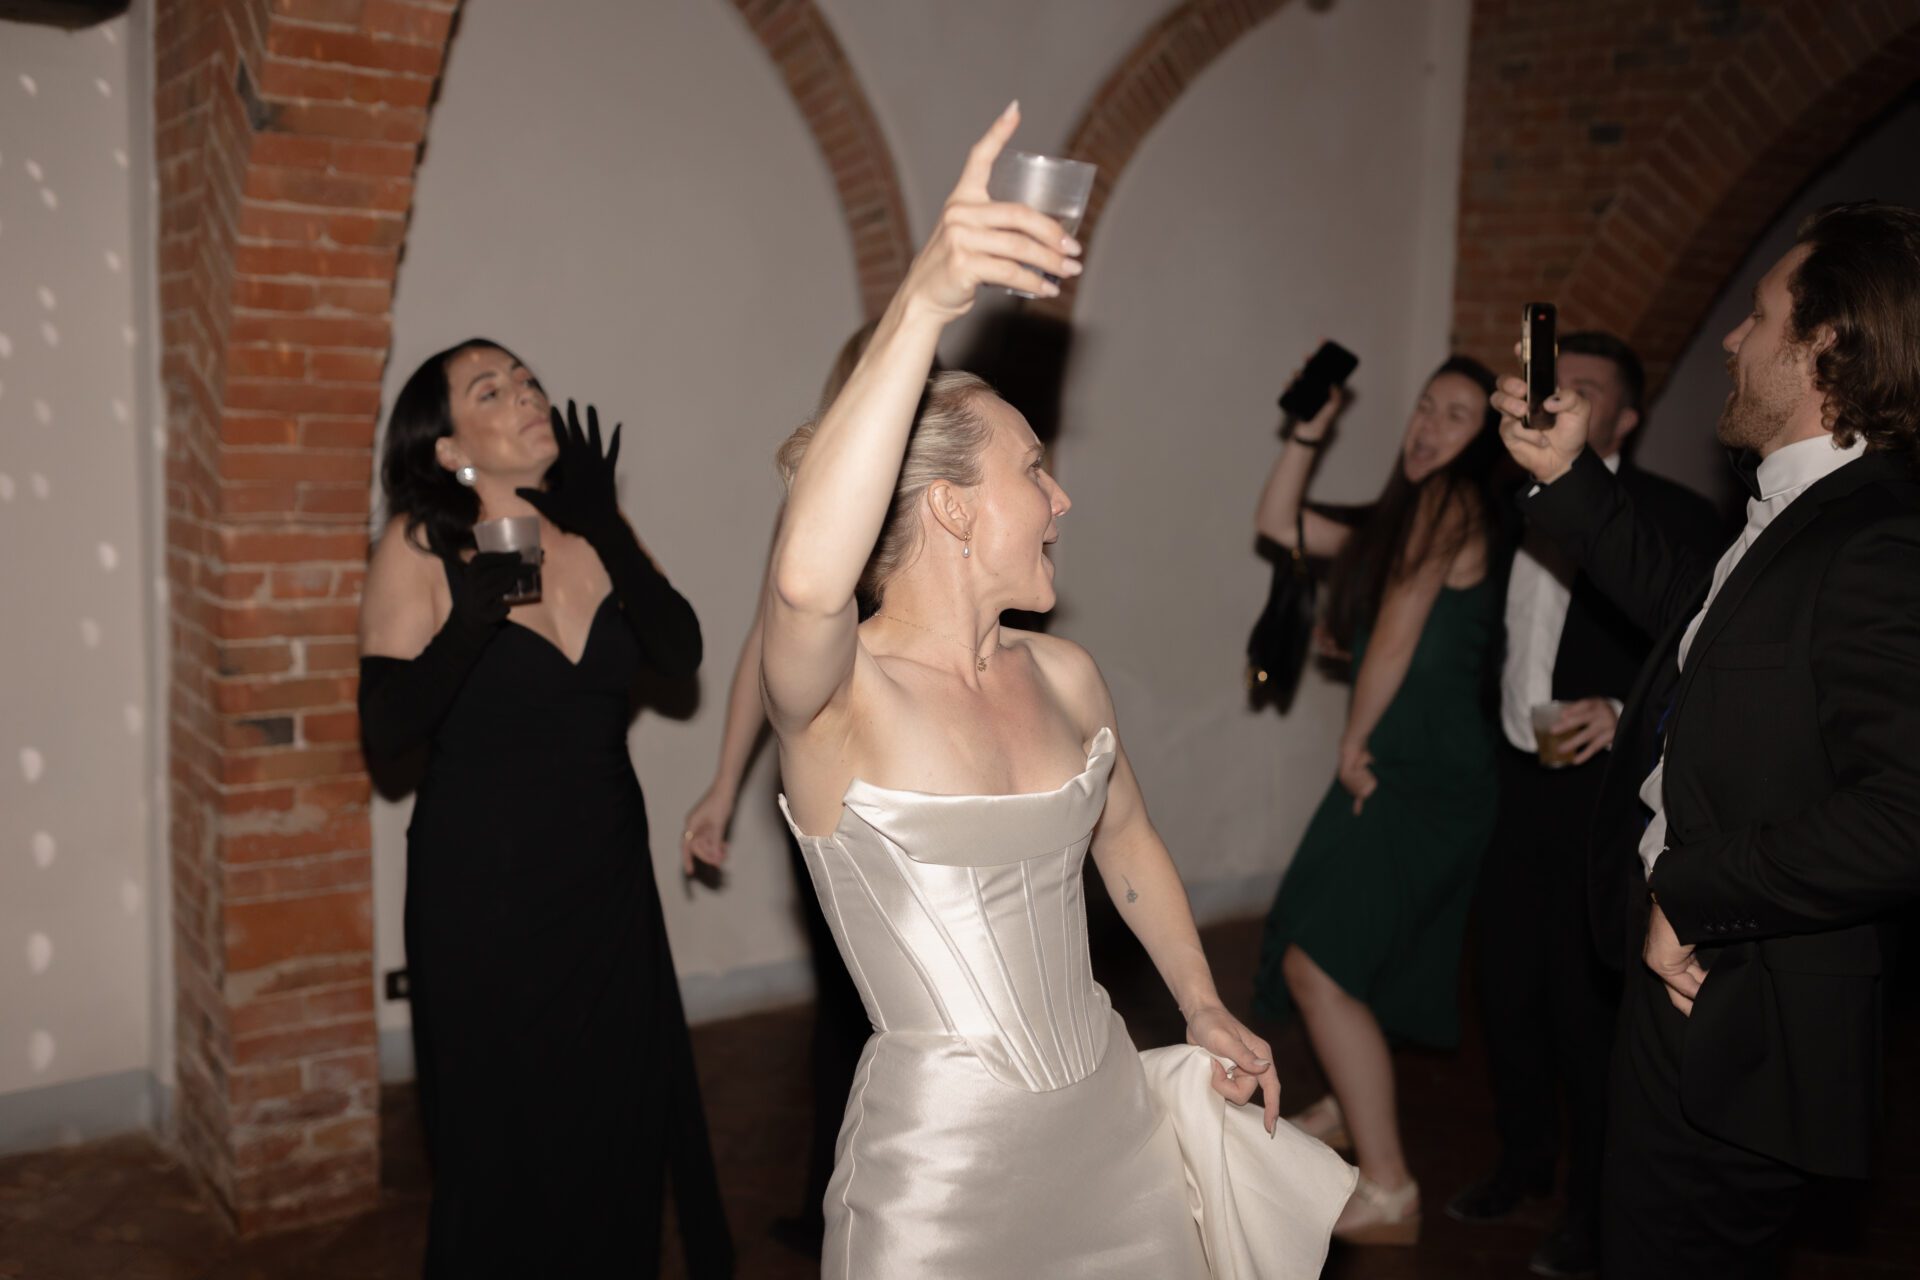 The bride enjoys the afterparty at her luxury Italian wedding